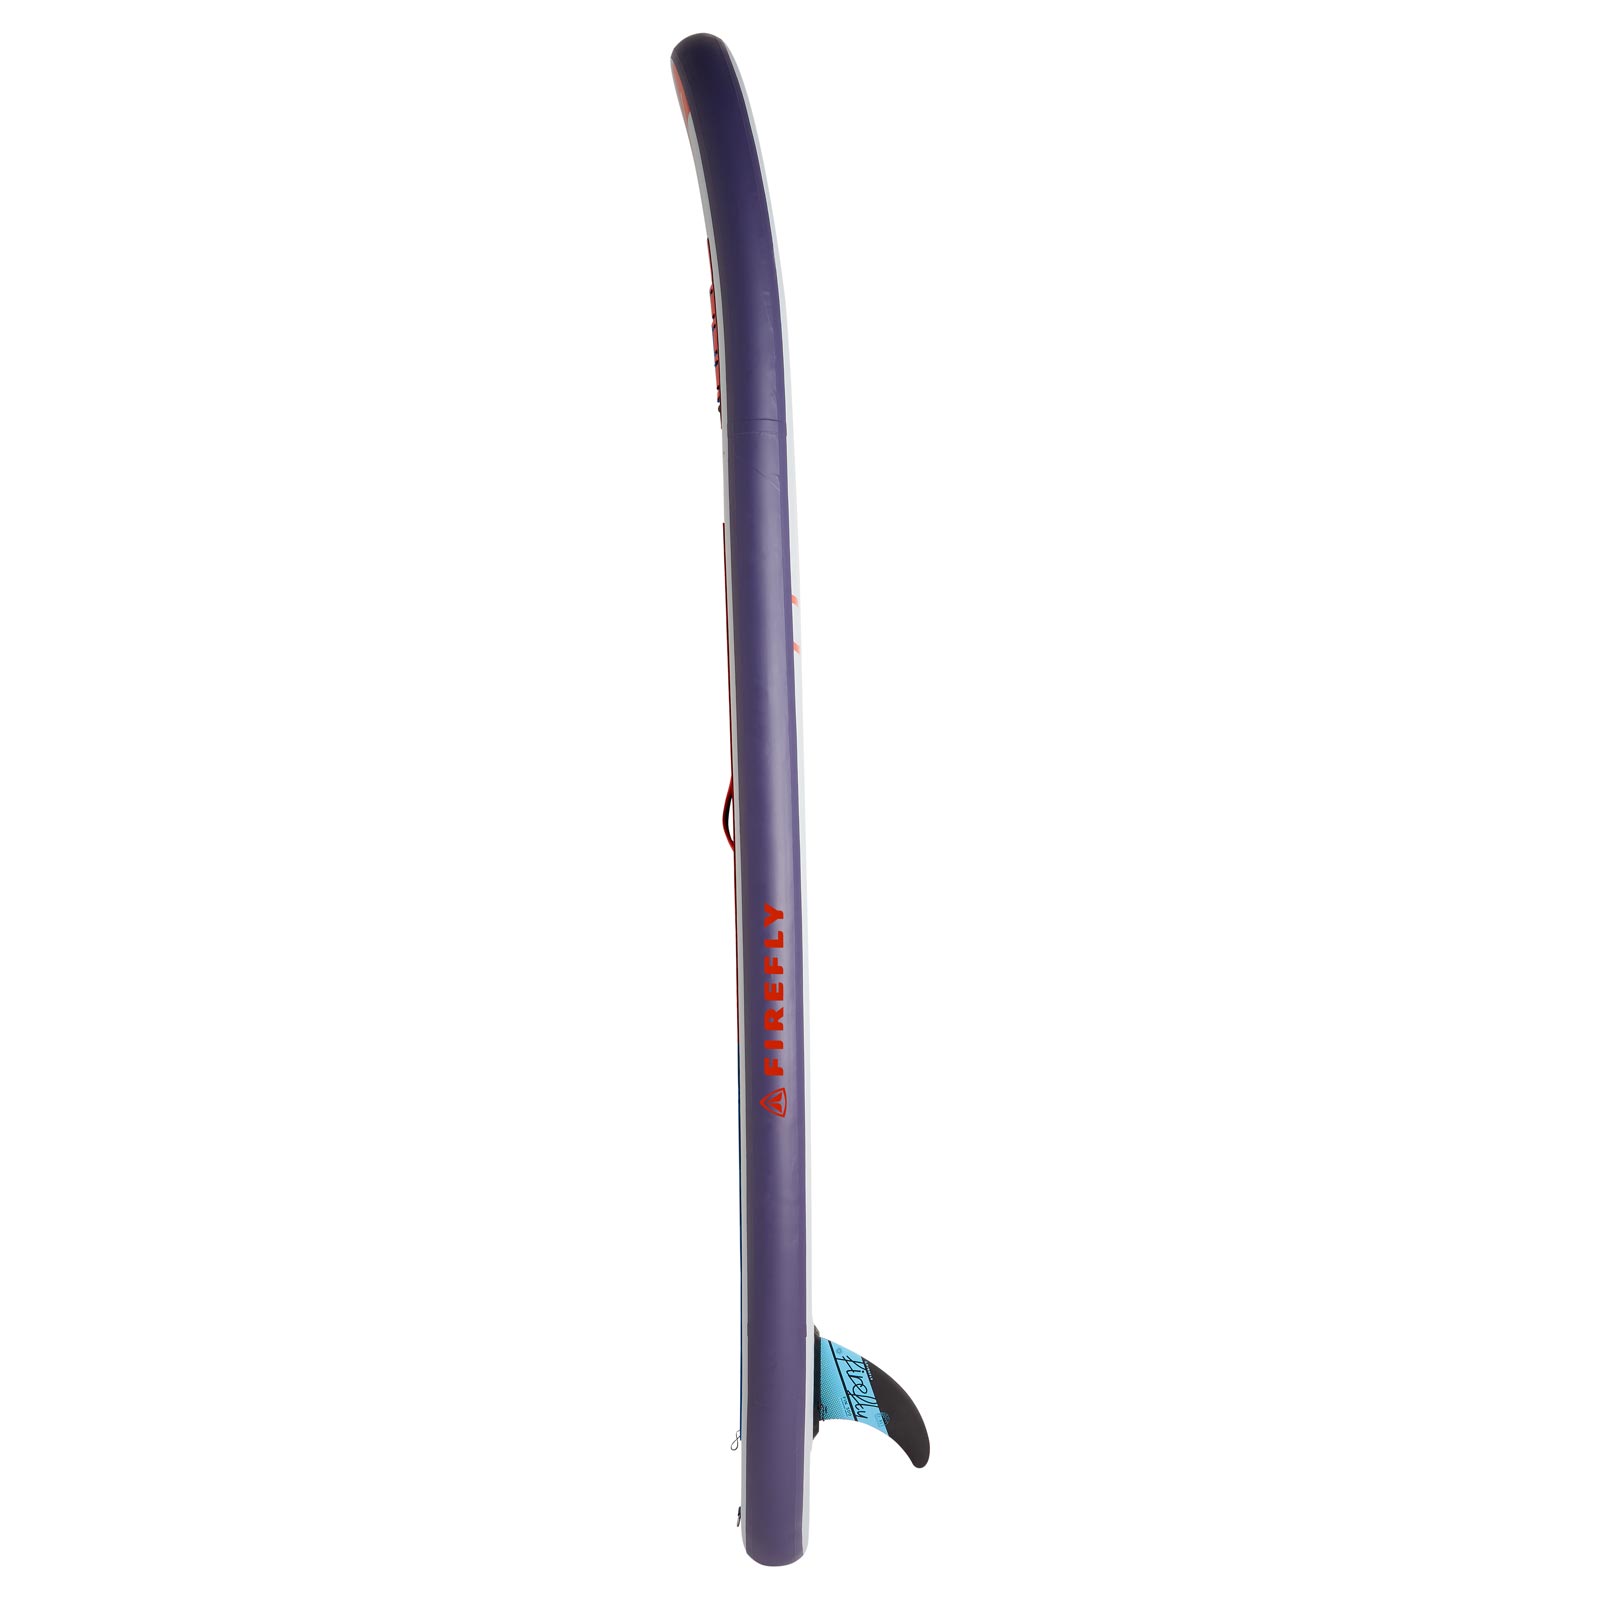 FIREFLY ISUP 100 II STAND-UP PADDLE BOARDING SET